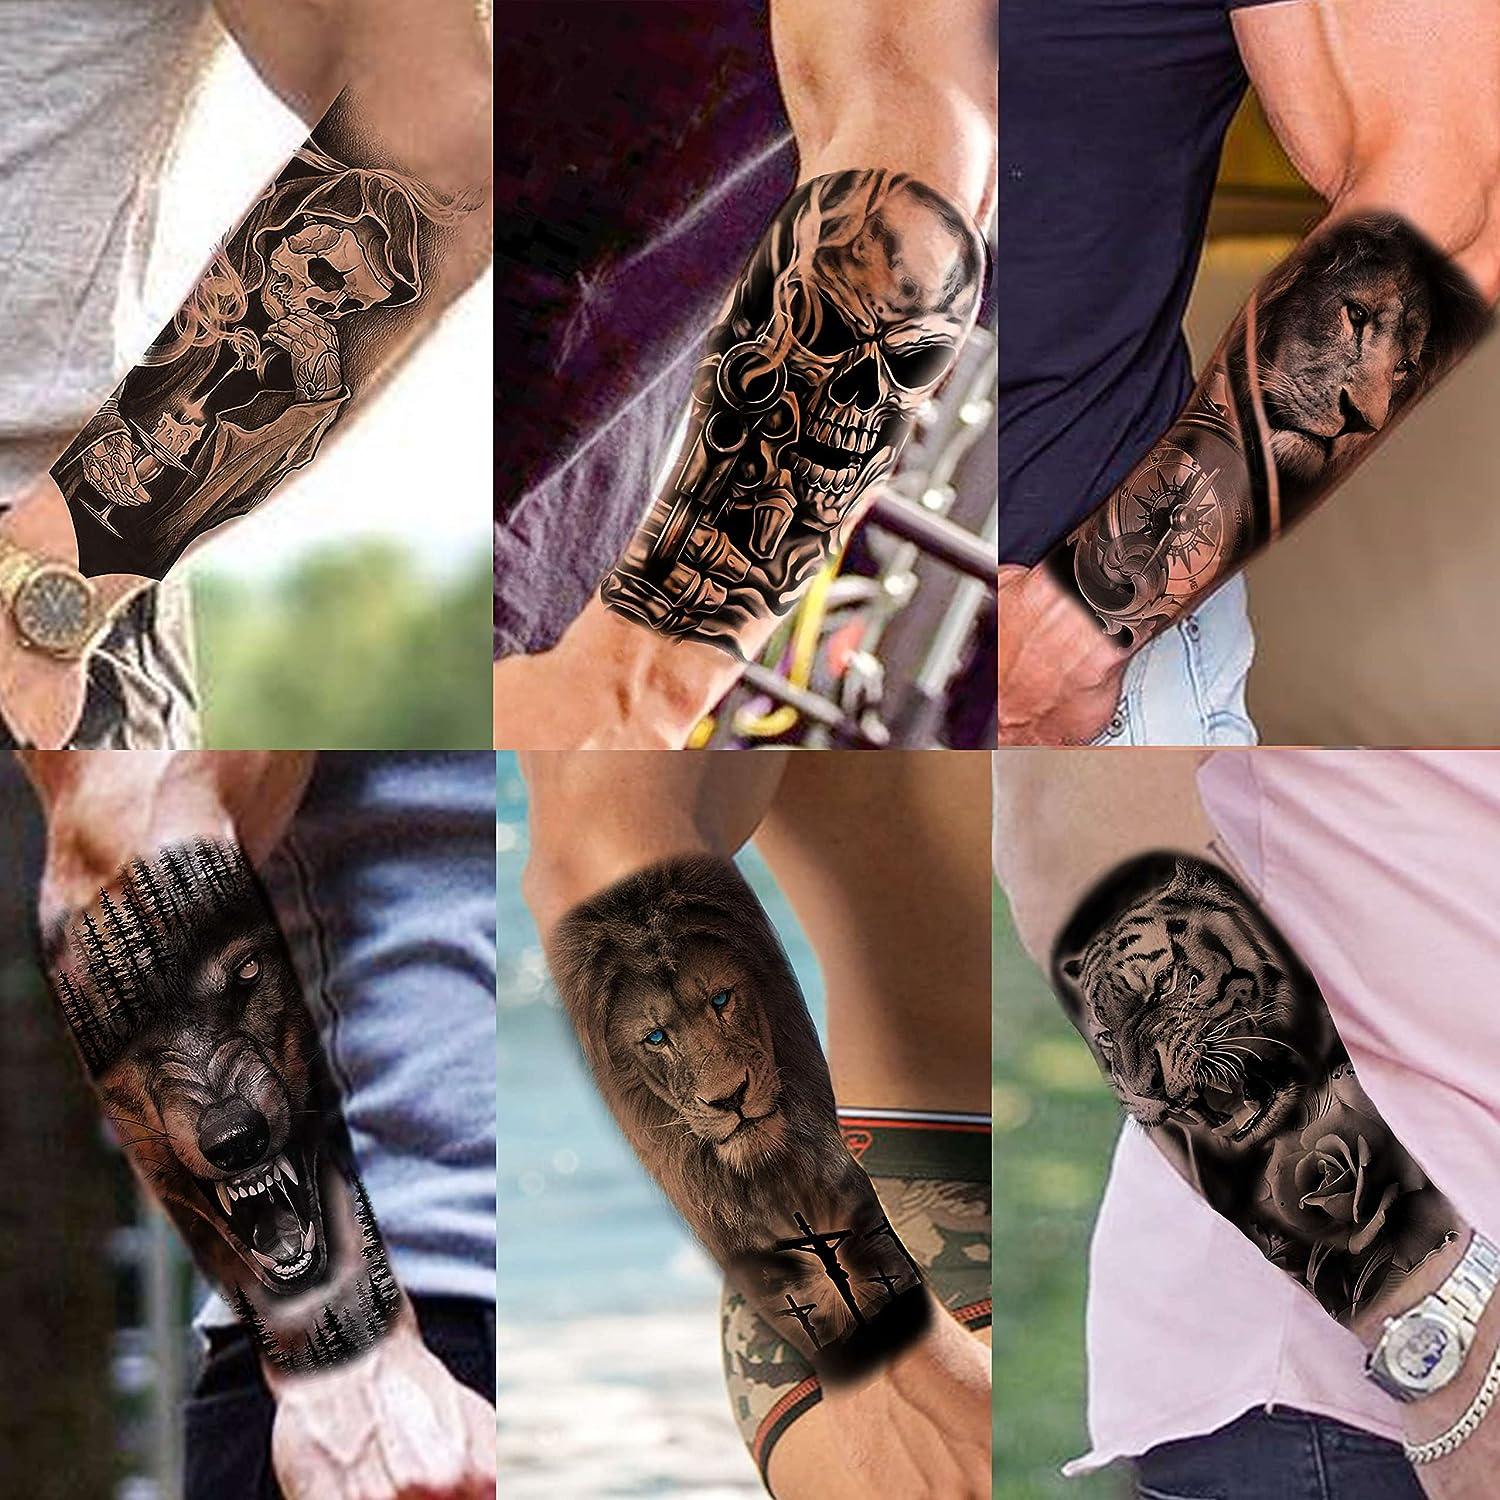 3D The Canvas Arts Temporary Tattoo Waterproof For Men Women Wrist Arm Hand  Thighs Tattoo TBS-8405(Lion Face Tattoo) Size 19X12cm : Amazon.in: Beauty